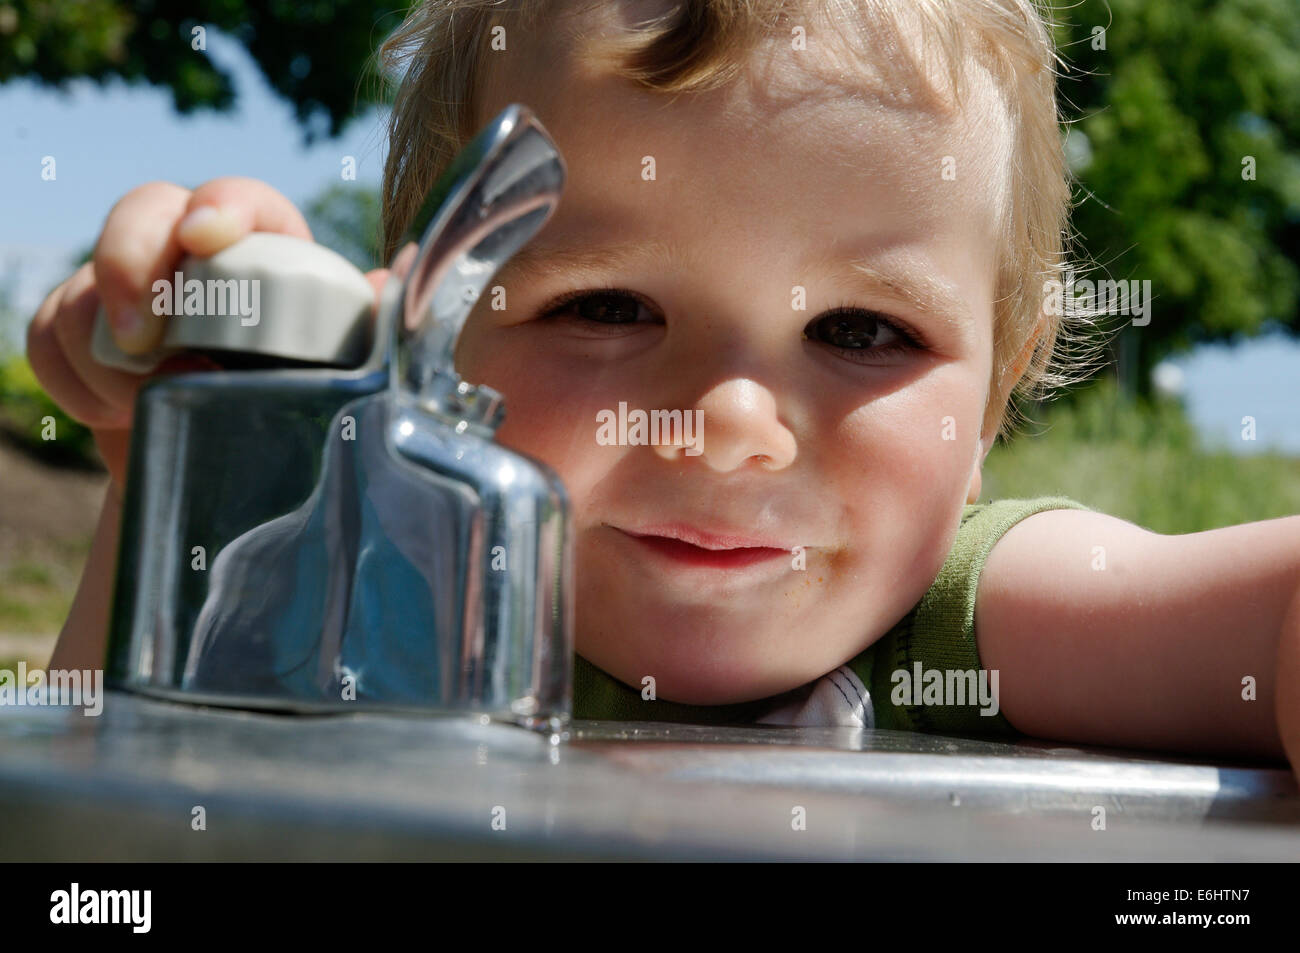 A young boy playing with a drinking water fountain Stock Photo